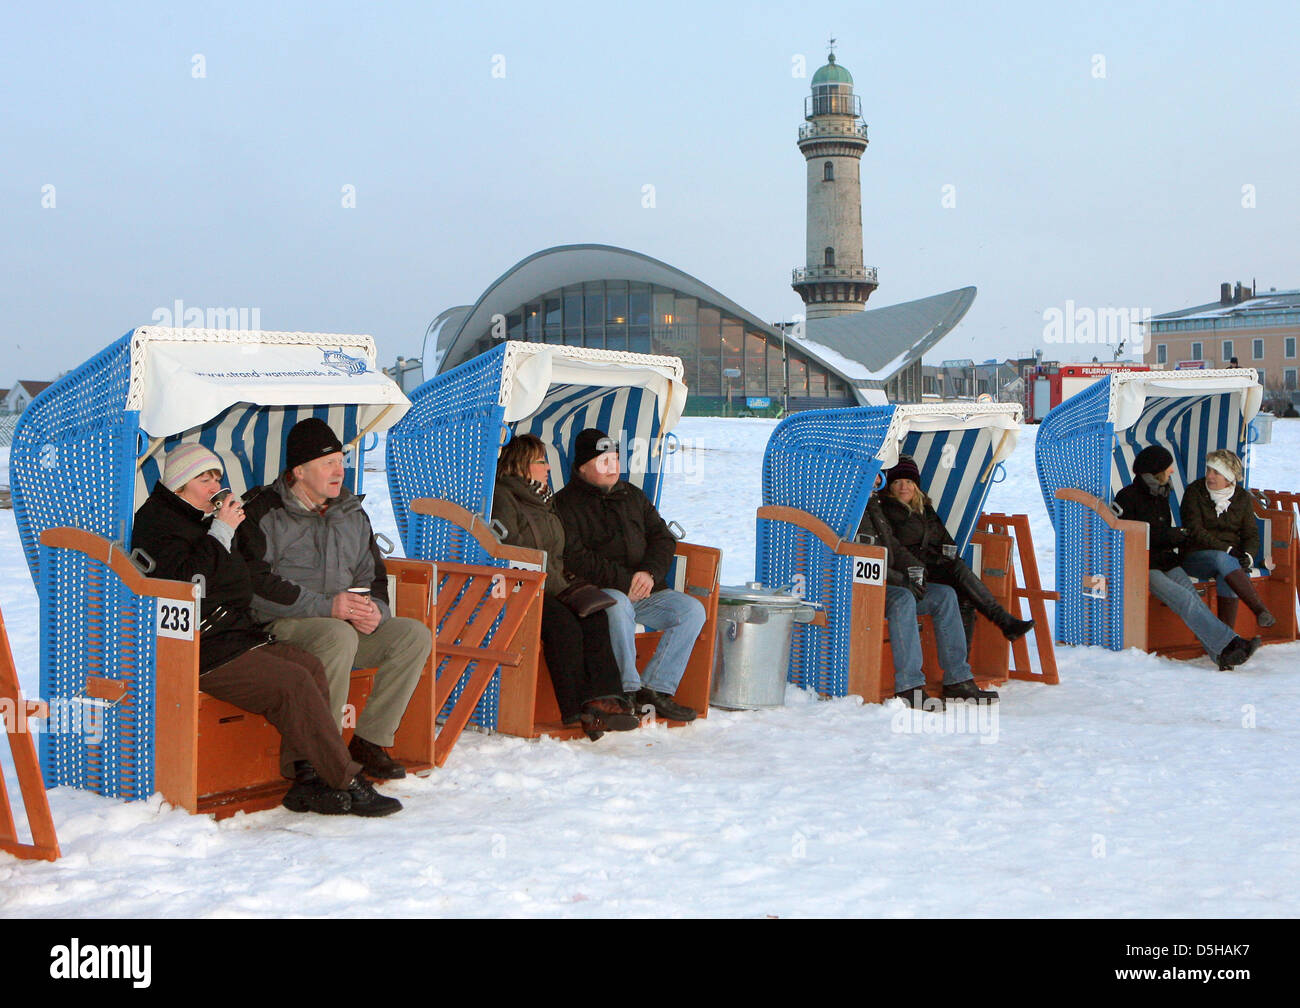 People attend the 'Warnemuende Winter Fun' at the snowy Baltic Sea beach in Warnemuende, Germany, 05 February 2010. Beach fires, beach chairs and gluehwein craeated a pleasurable atmosphere. Photo: Bernd Wuestneck Stock Photo